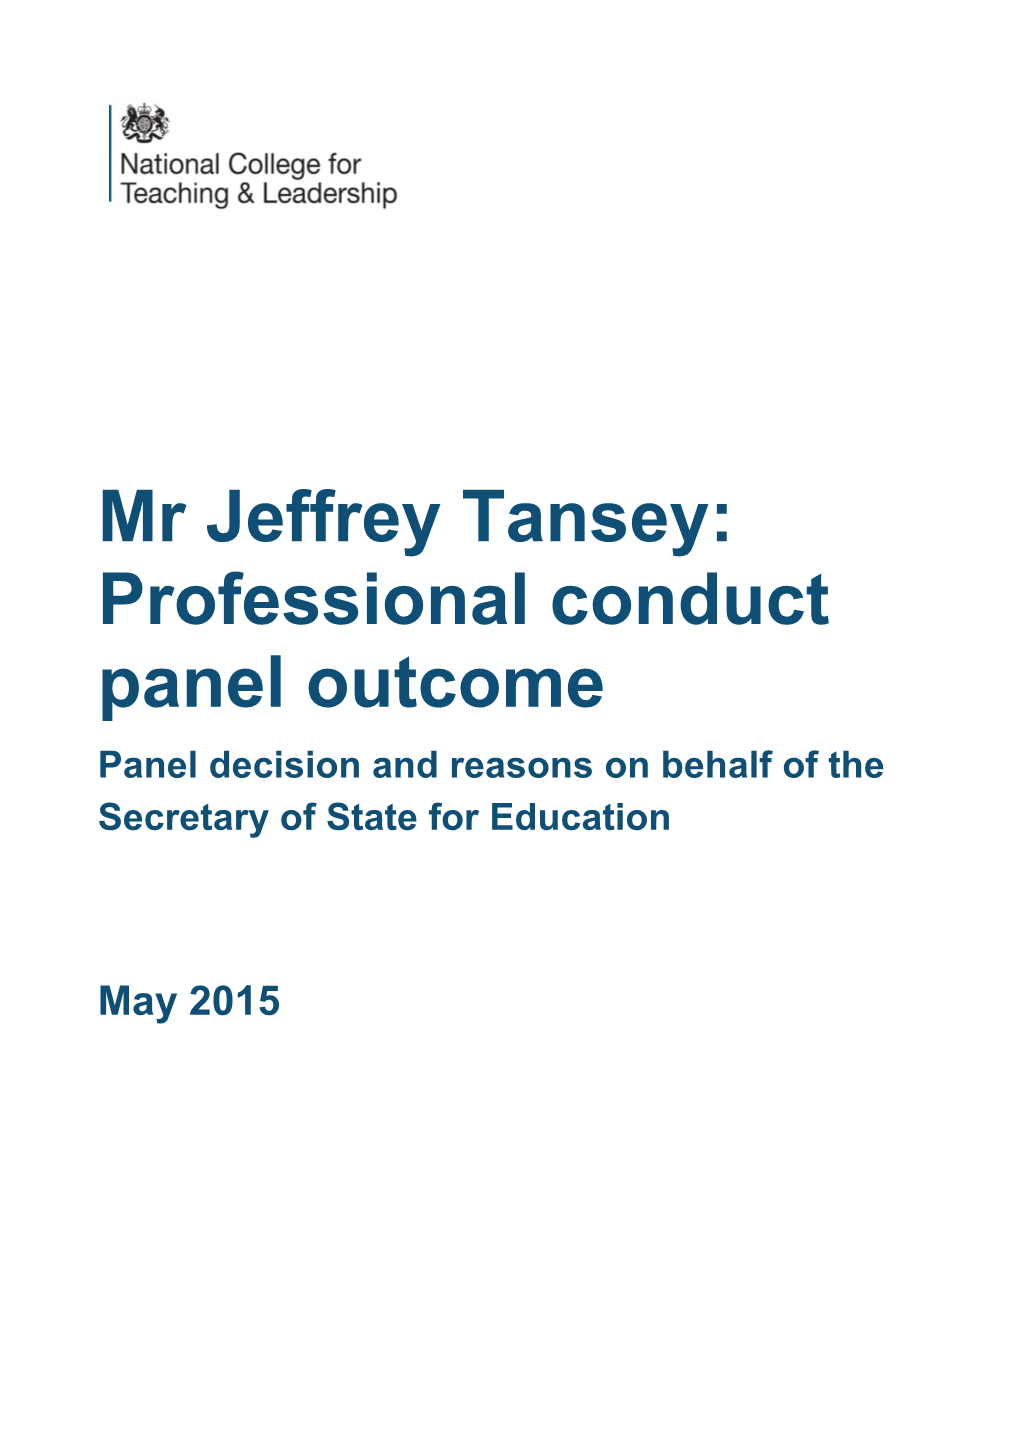 Mr Jeffrey Tansey: Professional Conduct Panel Outcome Panel Decision and Reasons on Behalf of the Secretary of State for Education